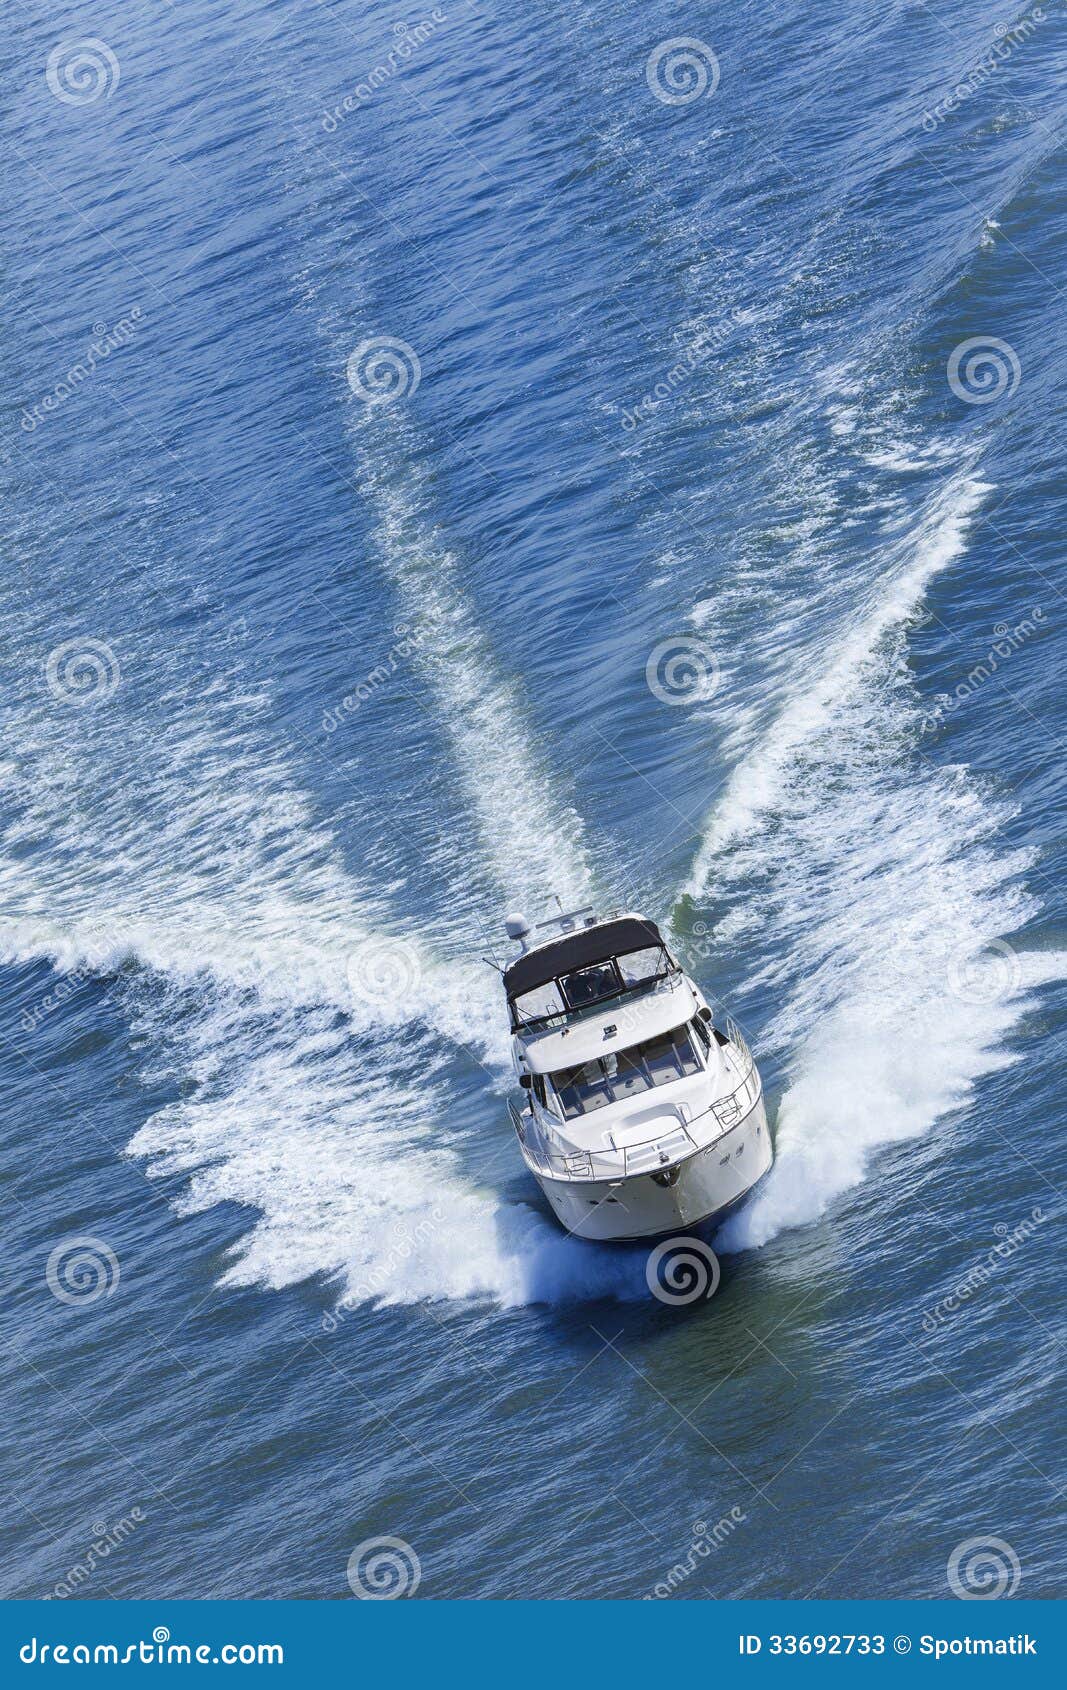 powerboat approaching large vessel